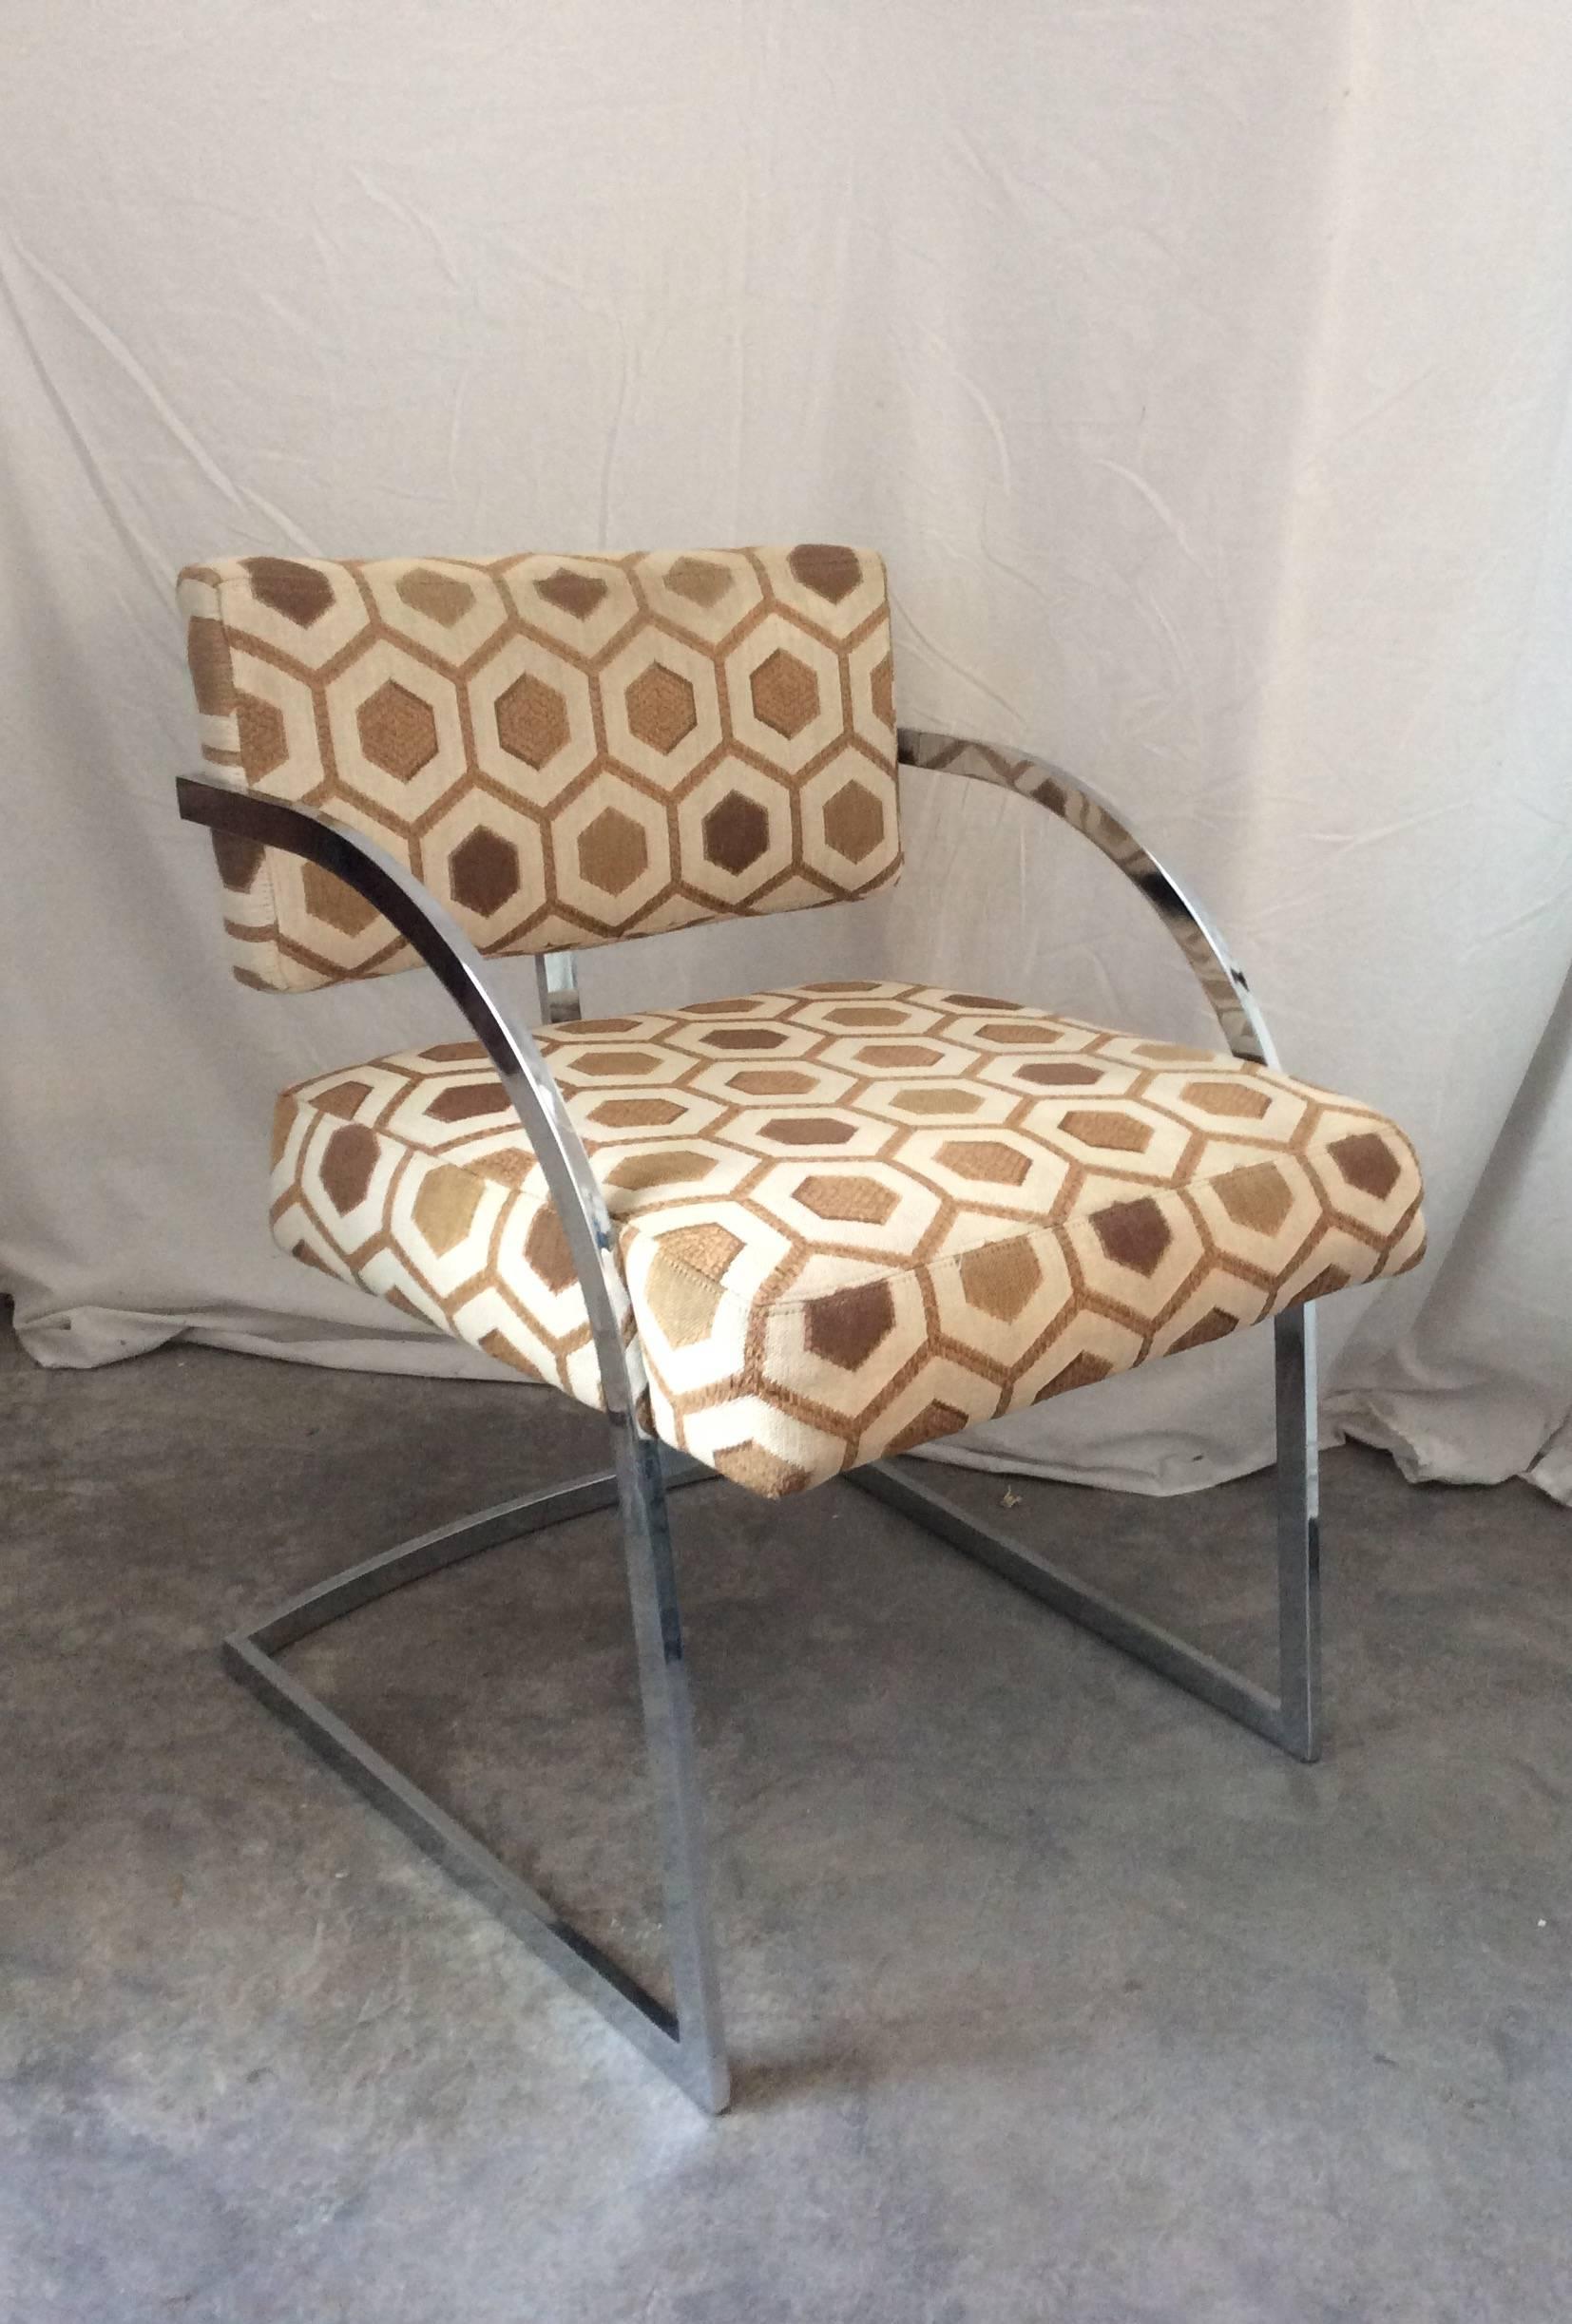 You are looking at a set of four dining chairs manufactured by Thayer Coggin and designed by Milo Baughman. These chairs are in all original condition and for the most part in really good shape. The fabric has a cool embroidered geometric design in